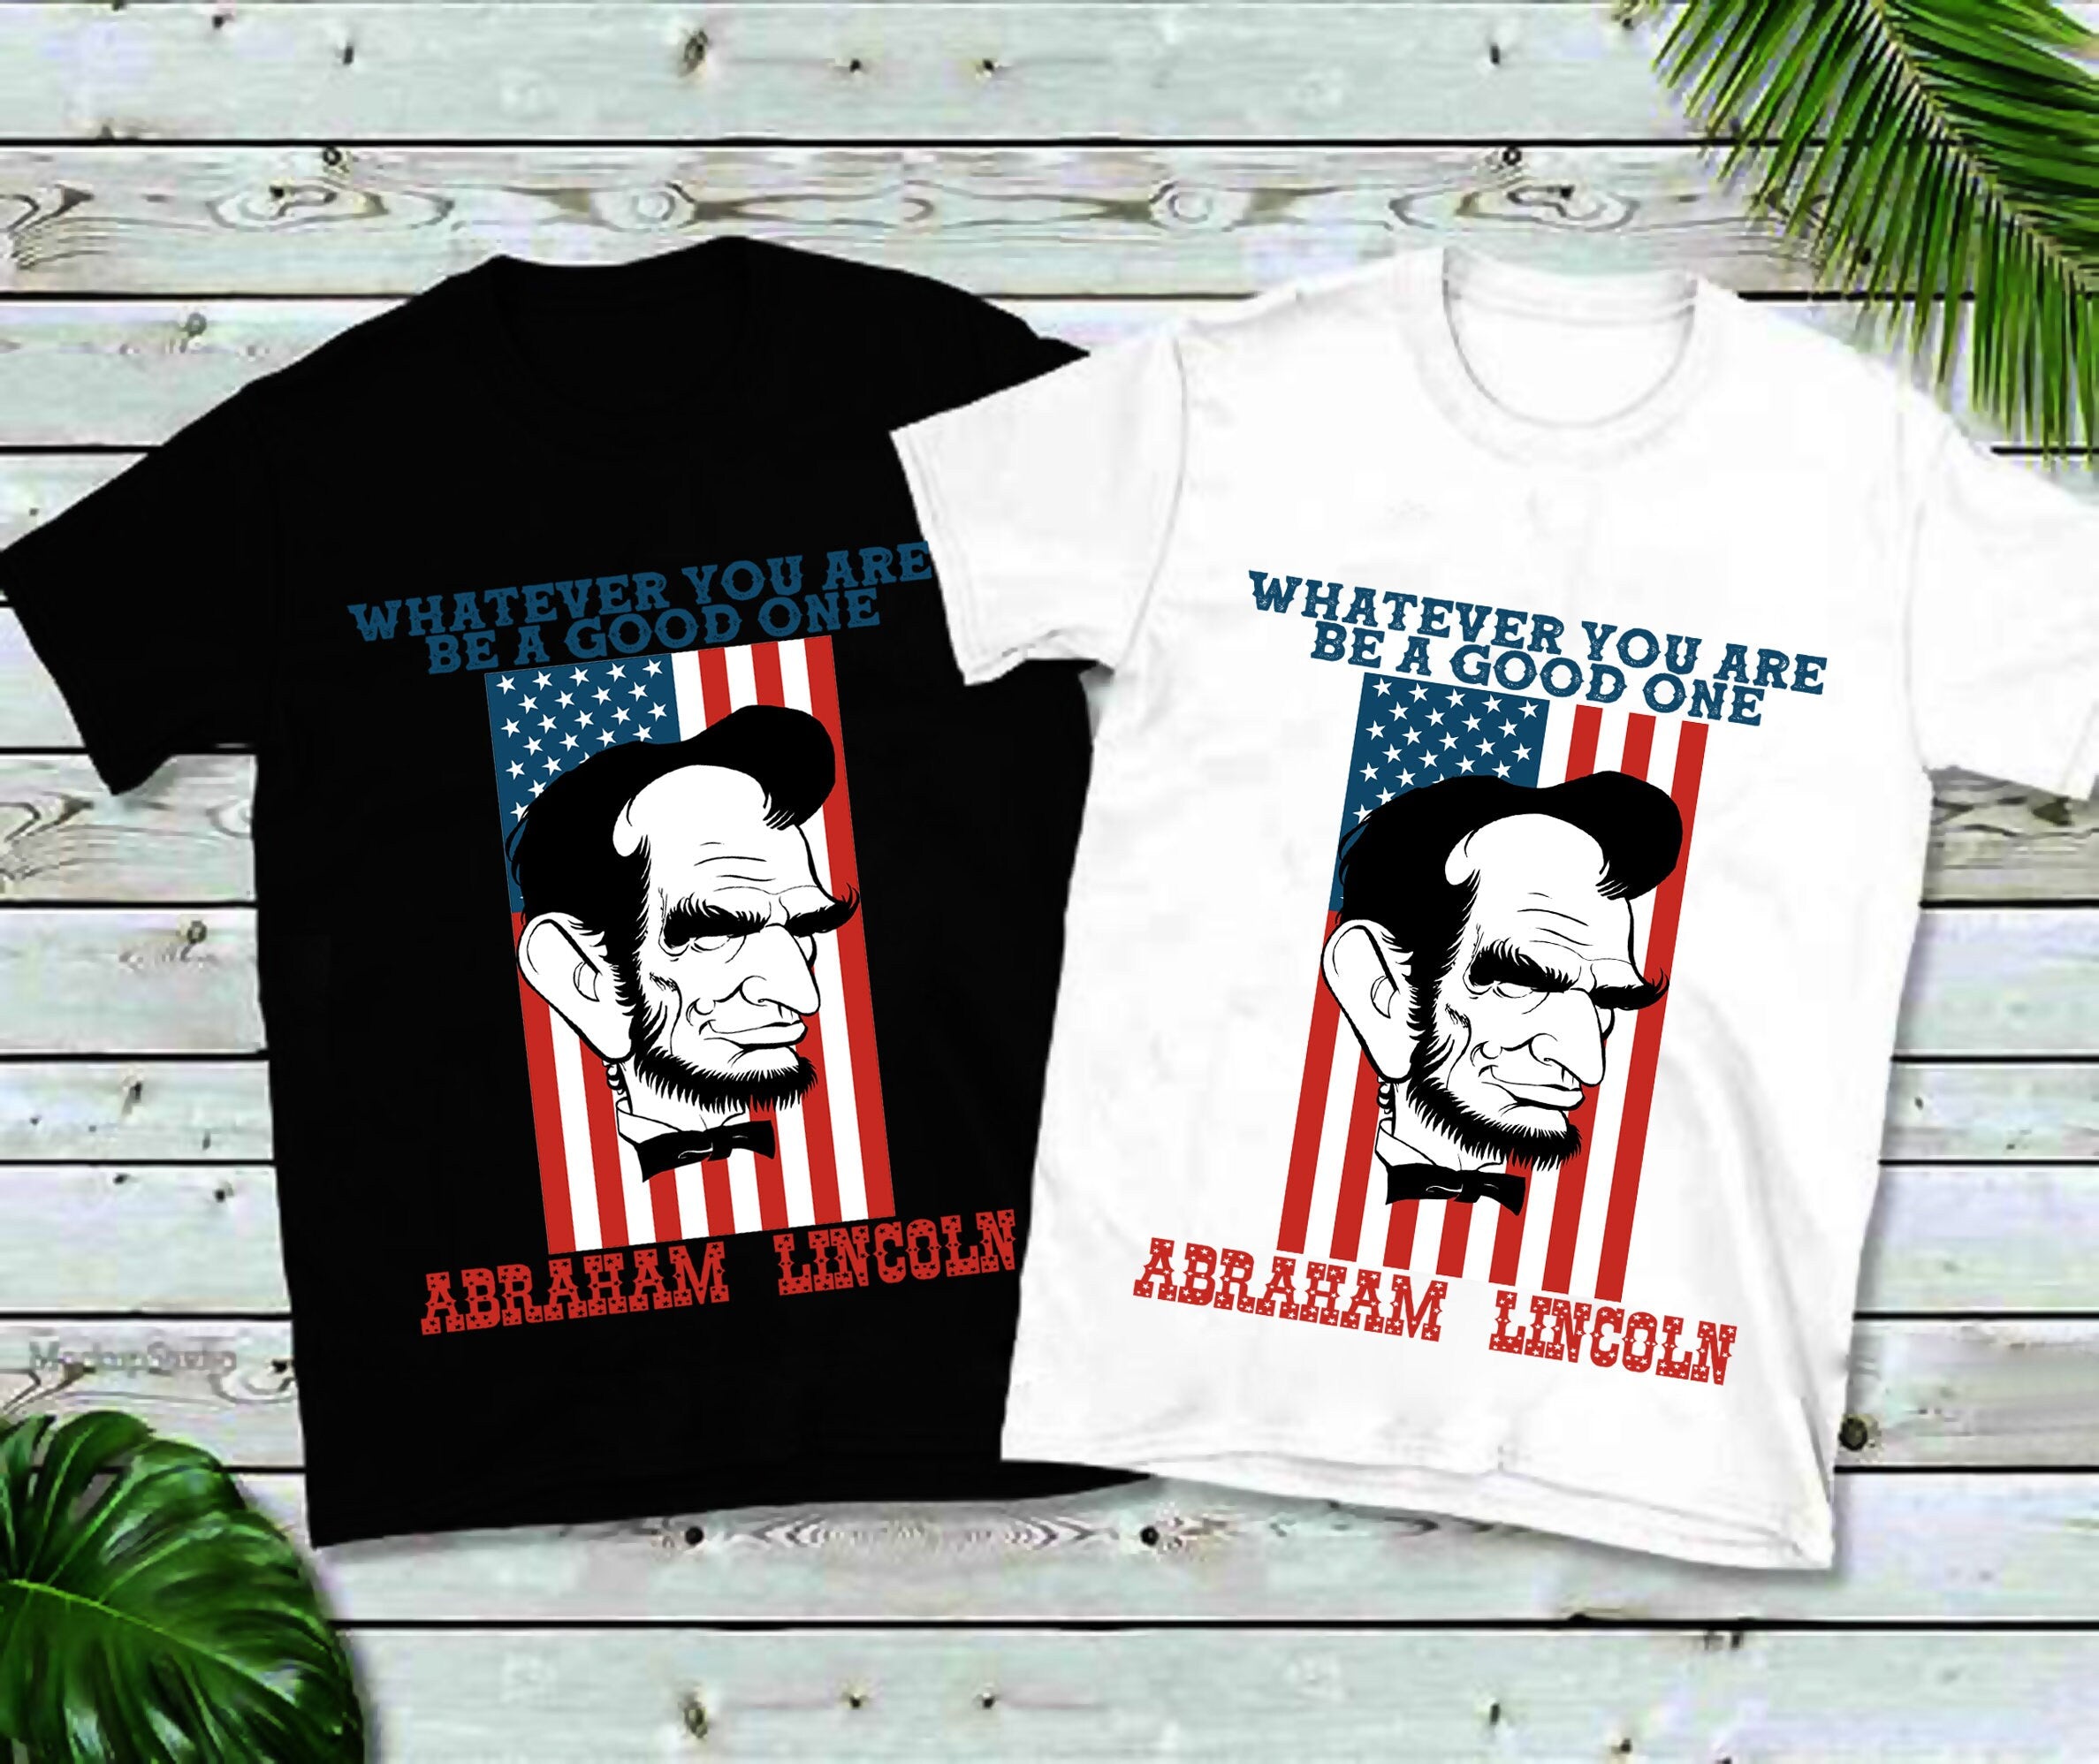 Whatever You Are Be A Good One, Abraham Lincoln stuttermabolir, America Shirt, America, 4th of July Tee, Unisex Sized, USA, Abe Lincoln, Patriotic - plusminusco.com